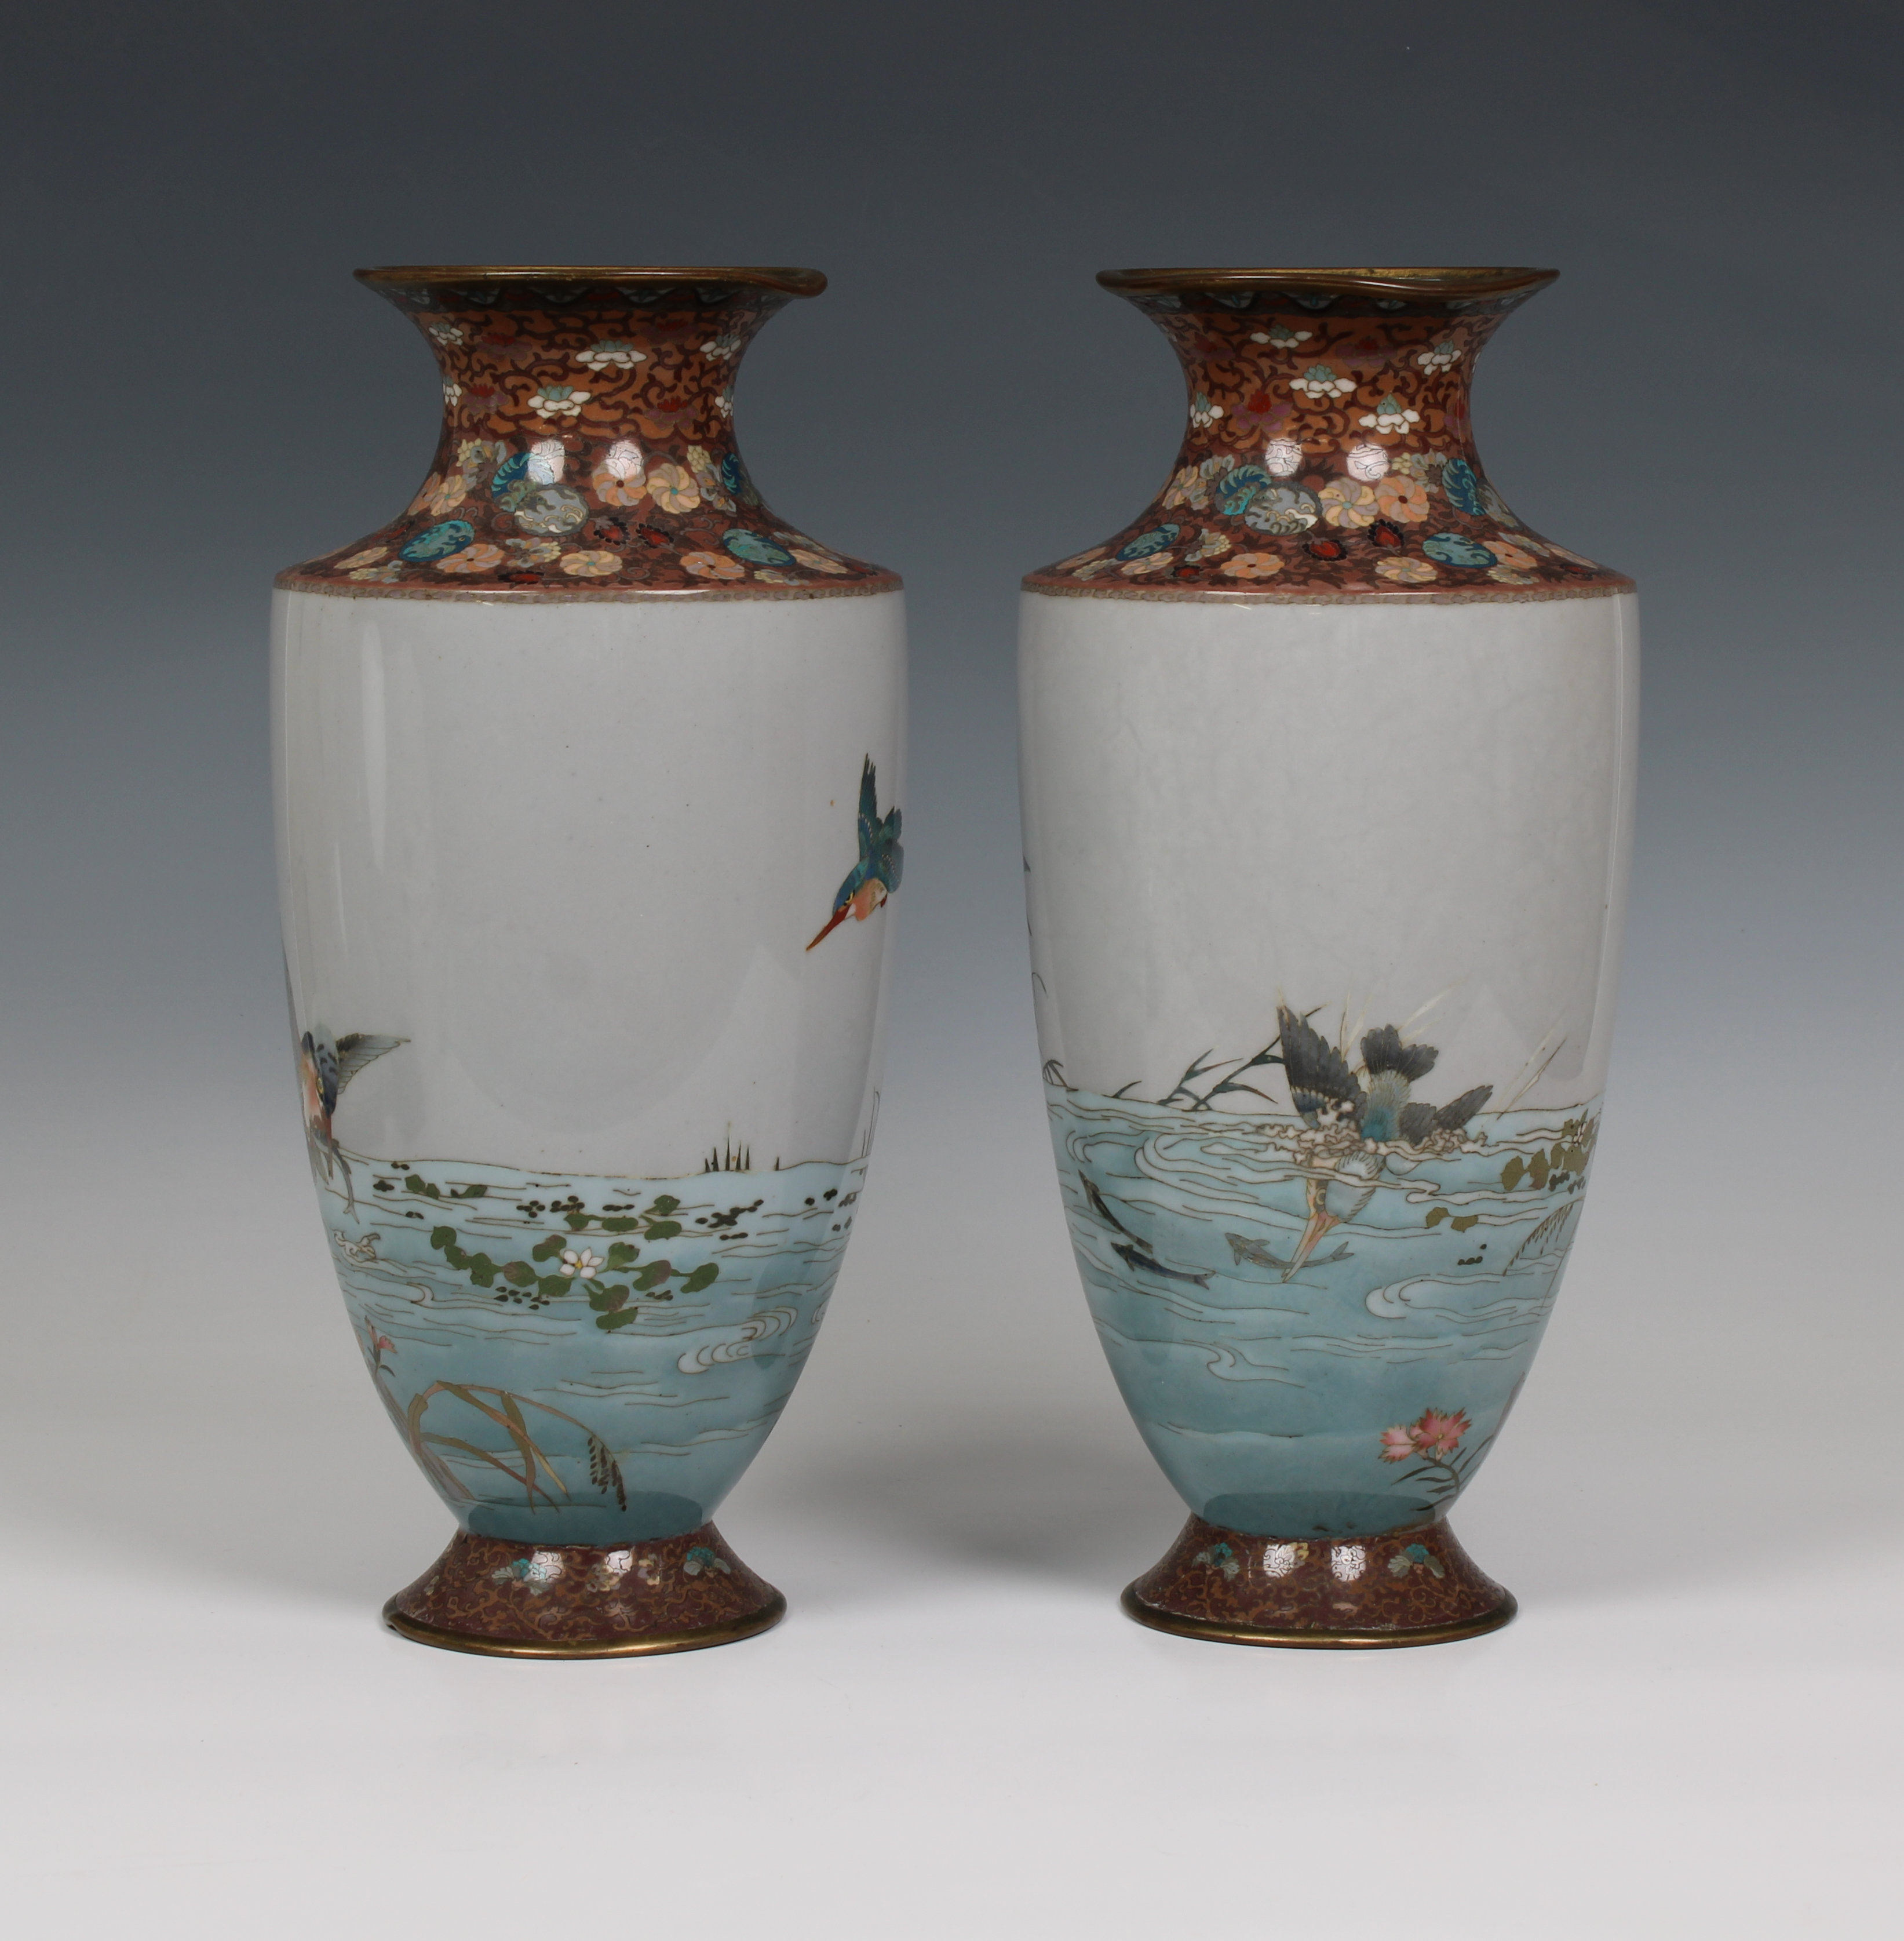 Pair of Japanese cloisonné vases in the manner of Namikawa Sosuke (1847-1910) - Image 4 of 7